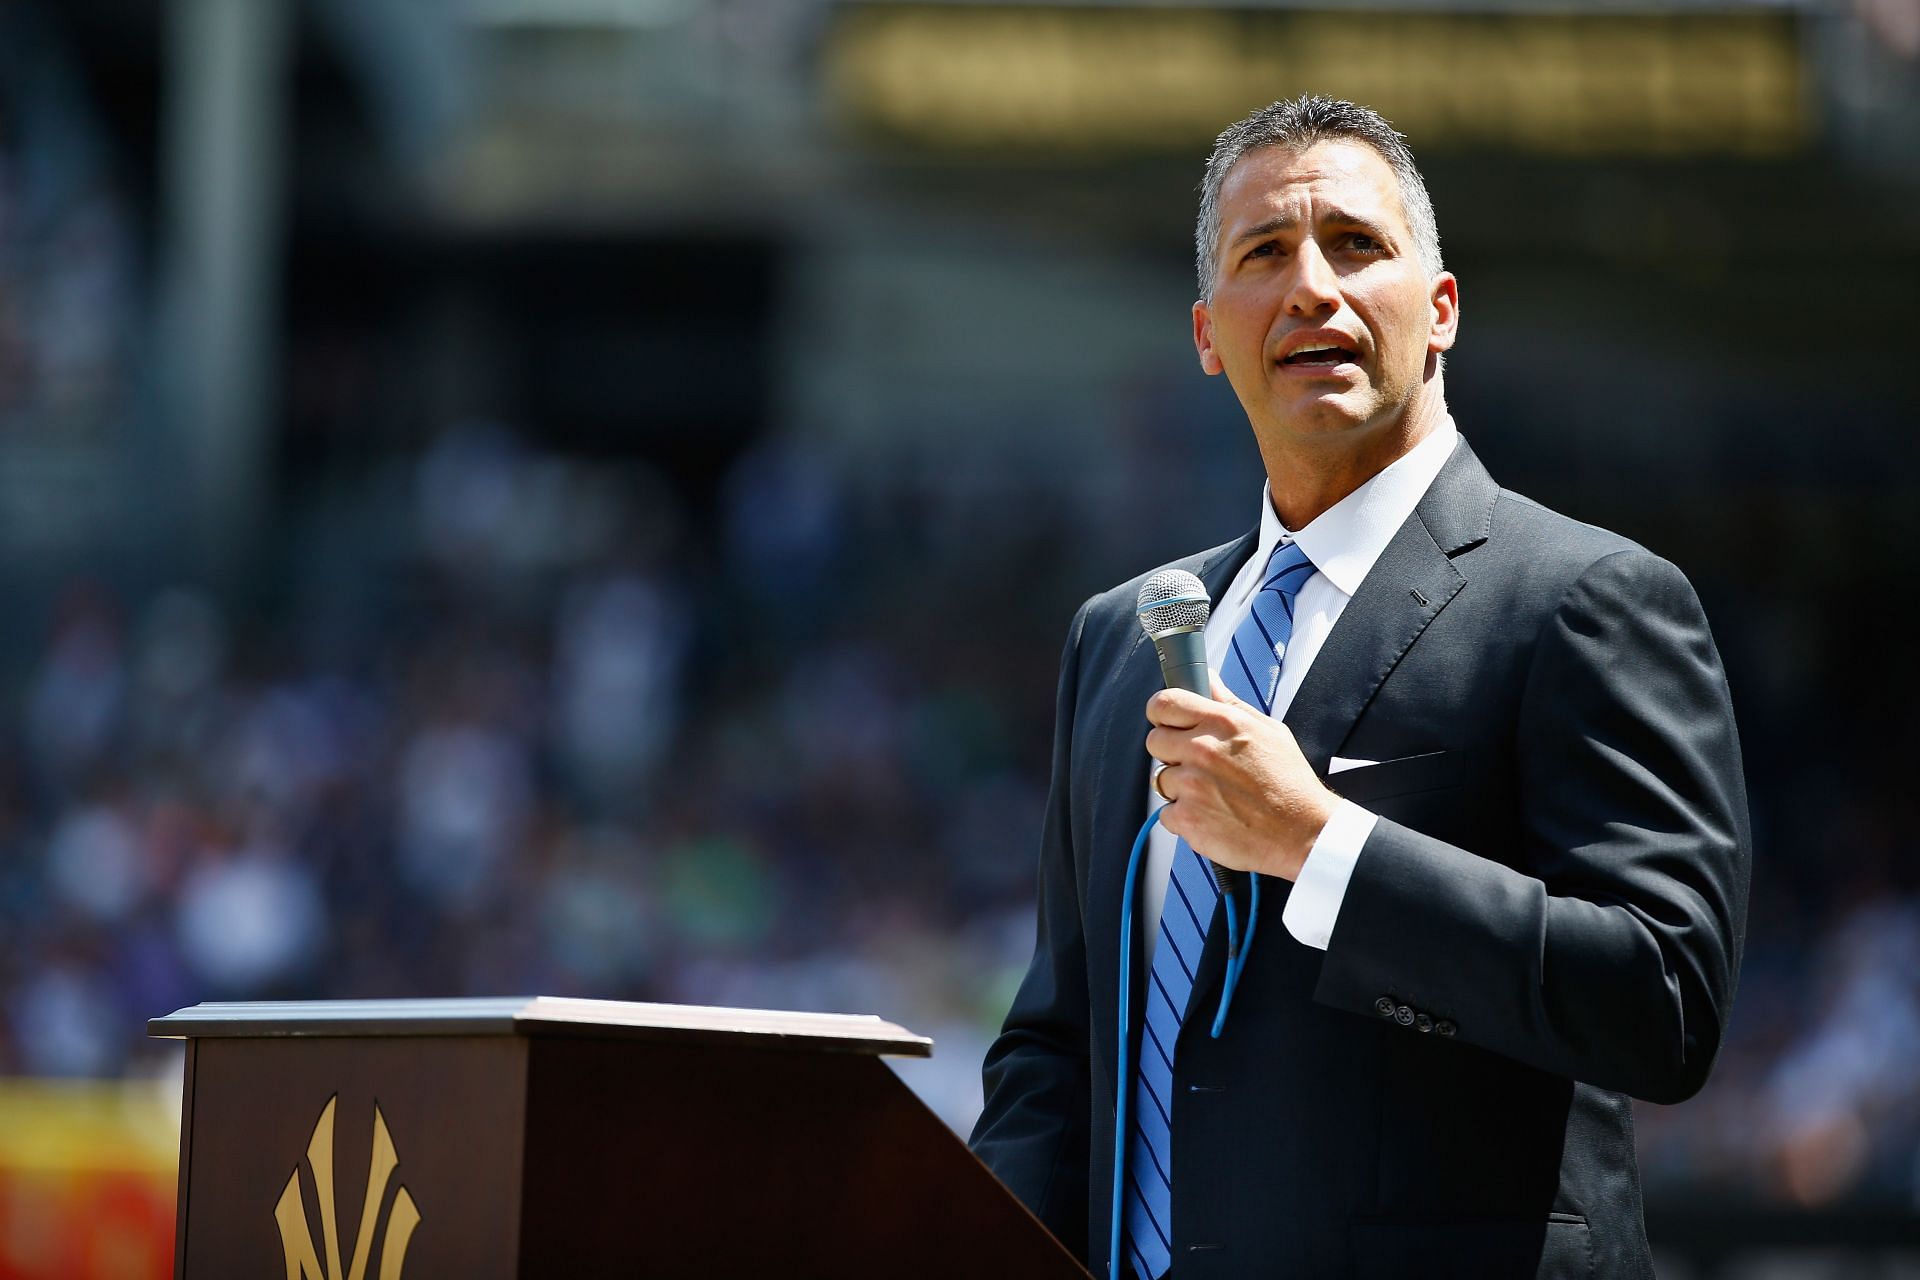 Surprisingly, Andy Pettitte did not throw 3000 strikeouts for the Yankees